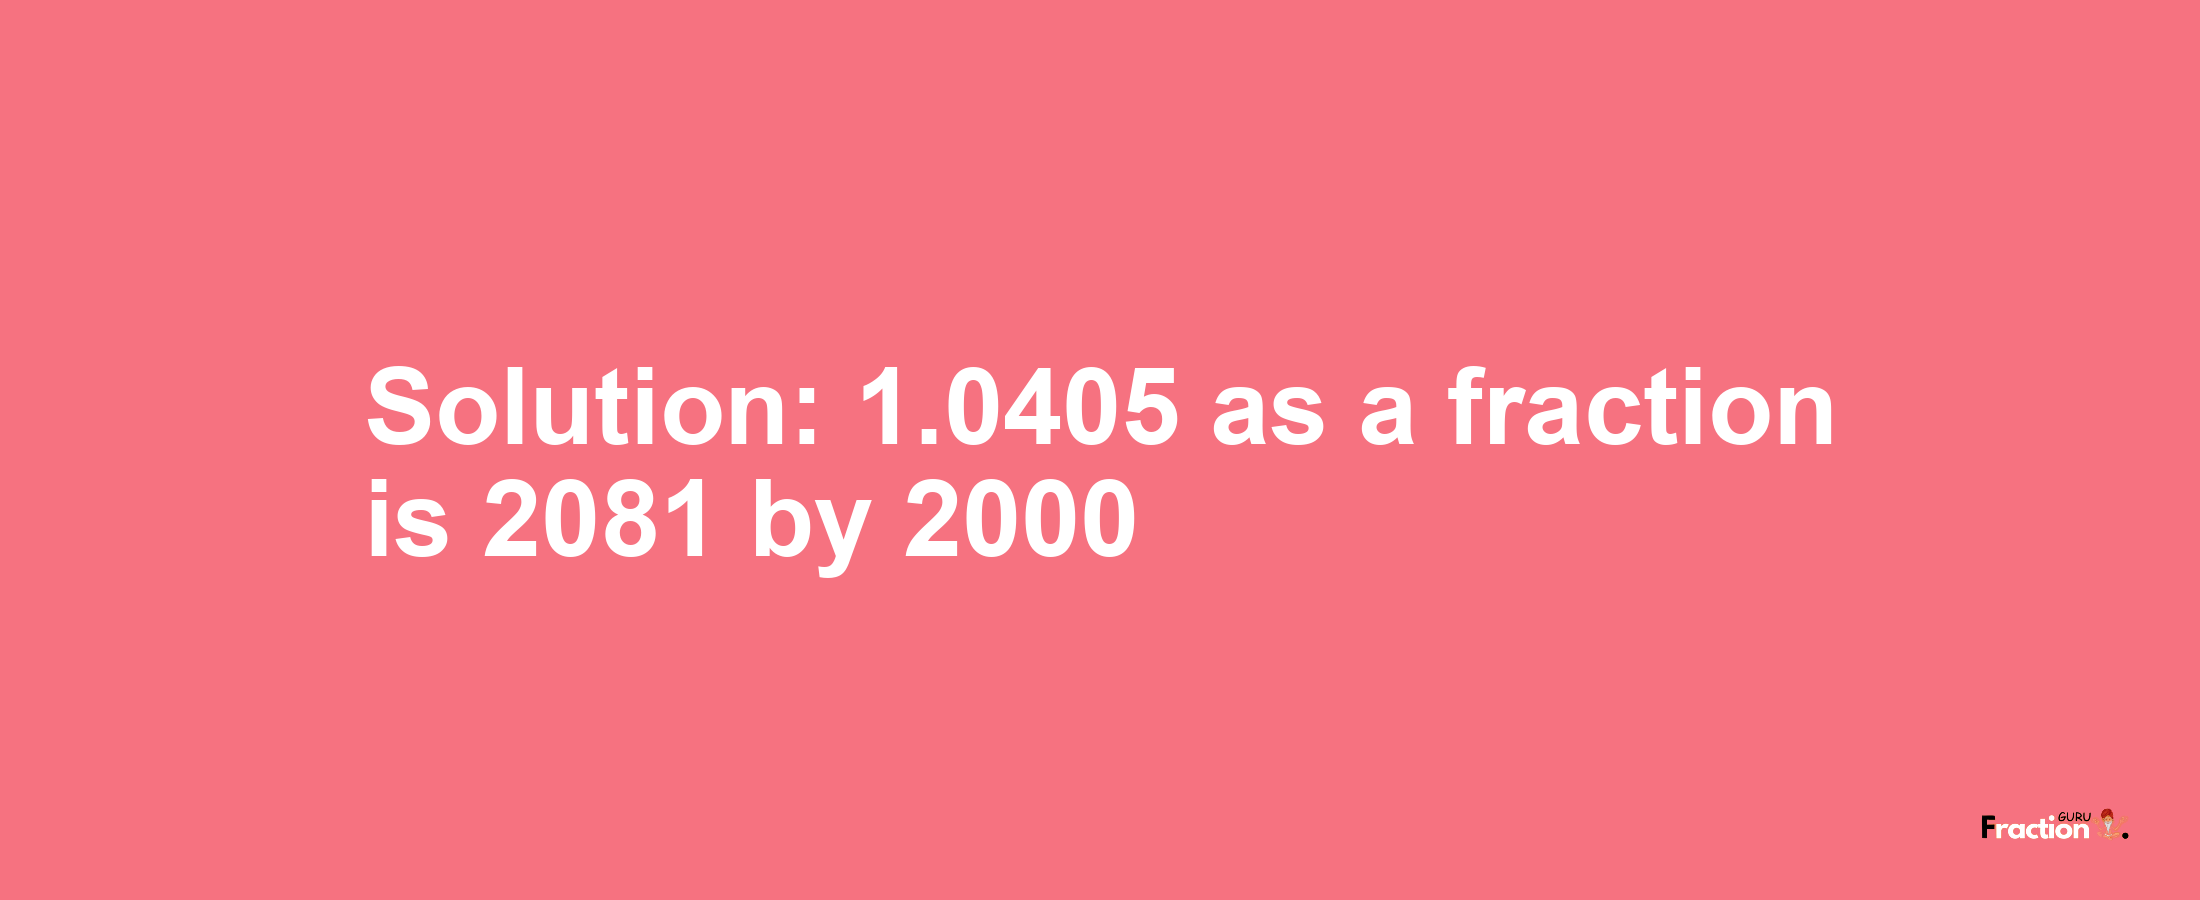 Solution:1.0405 as a fraction is 2081/2000